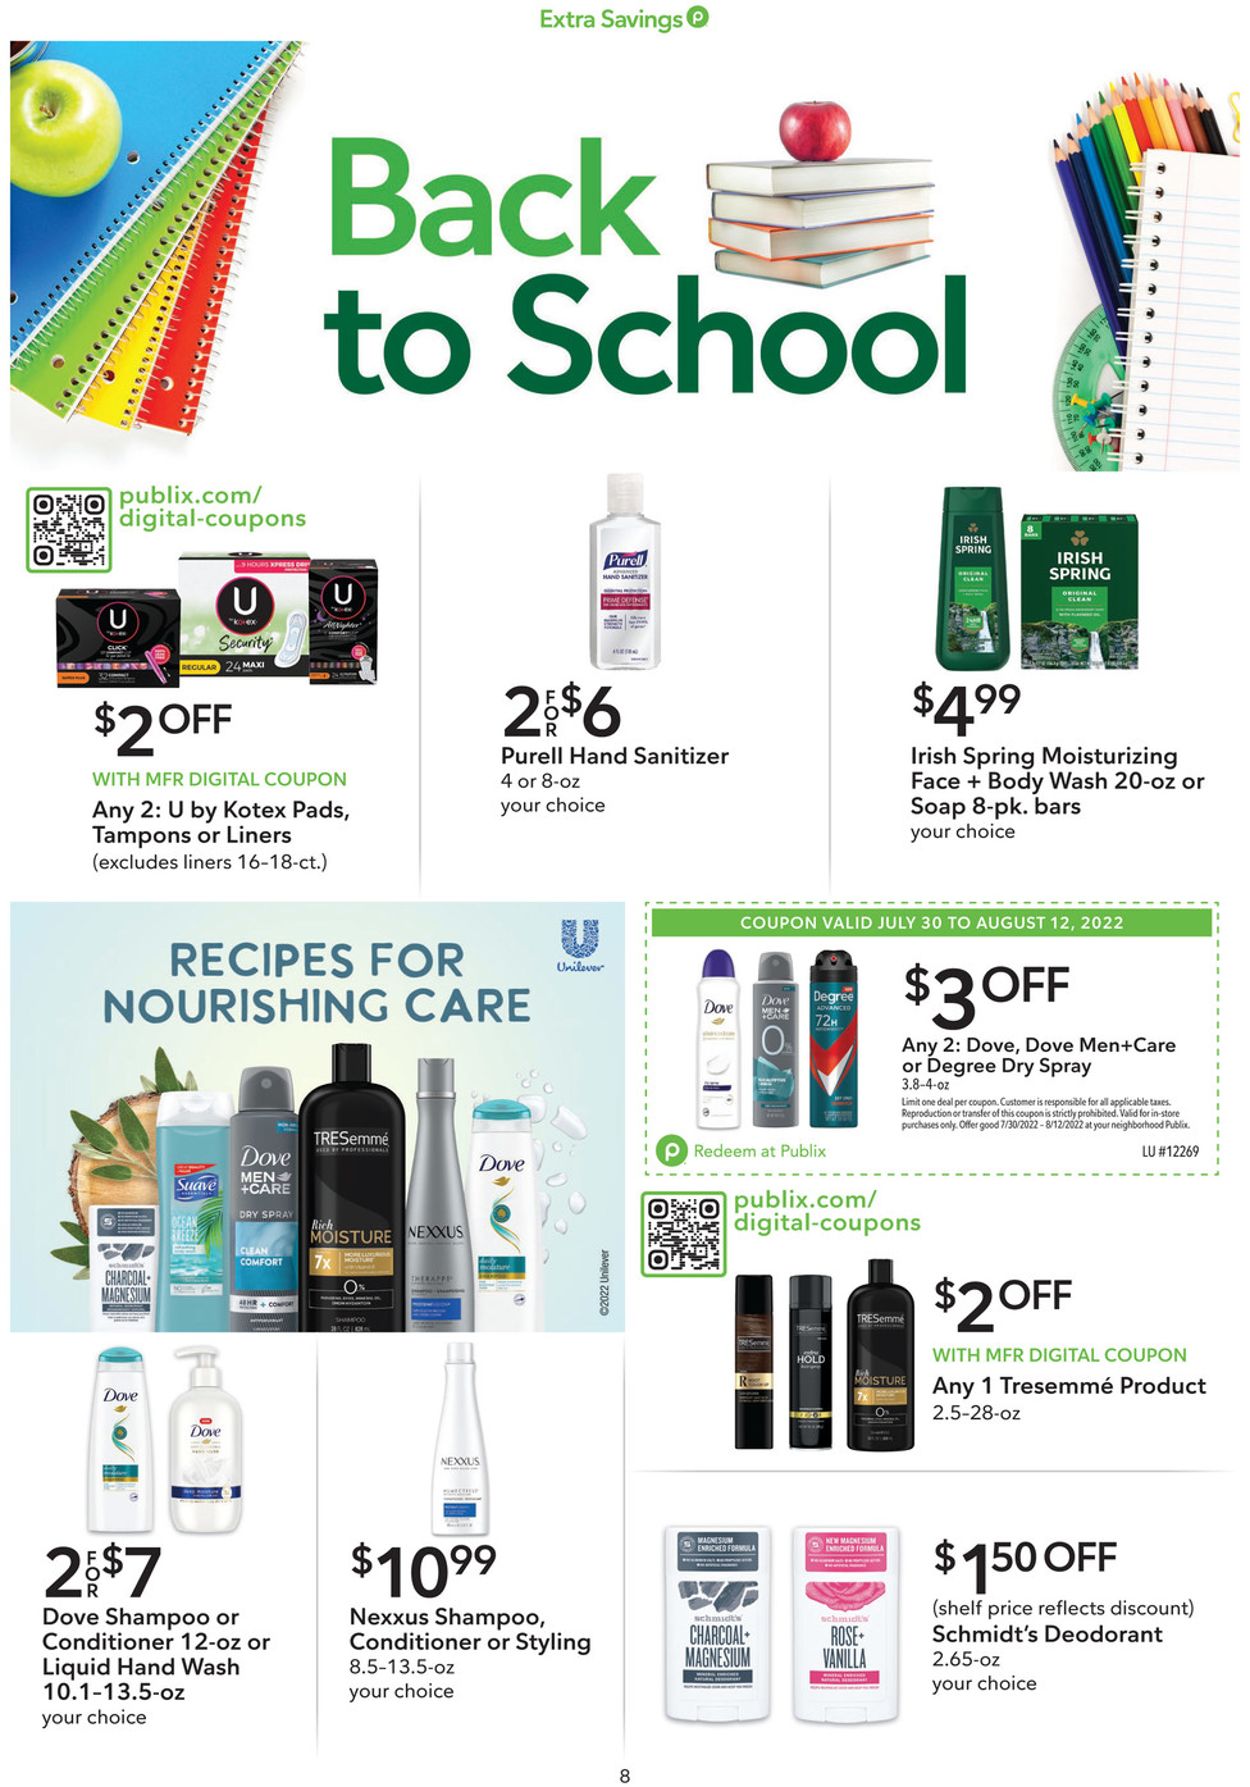 Publix Current weekly ad 07/30 - 08/12/2022 [8] - frequent-ads.com